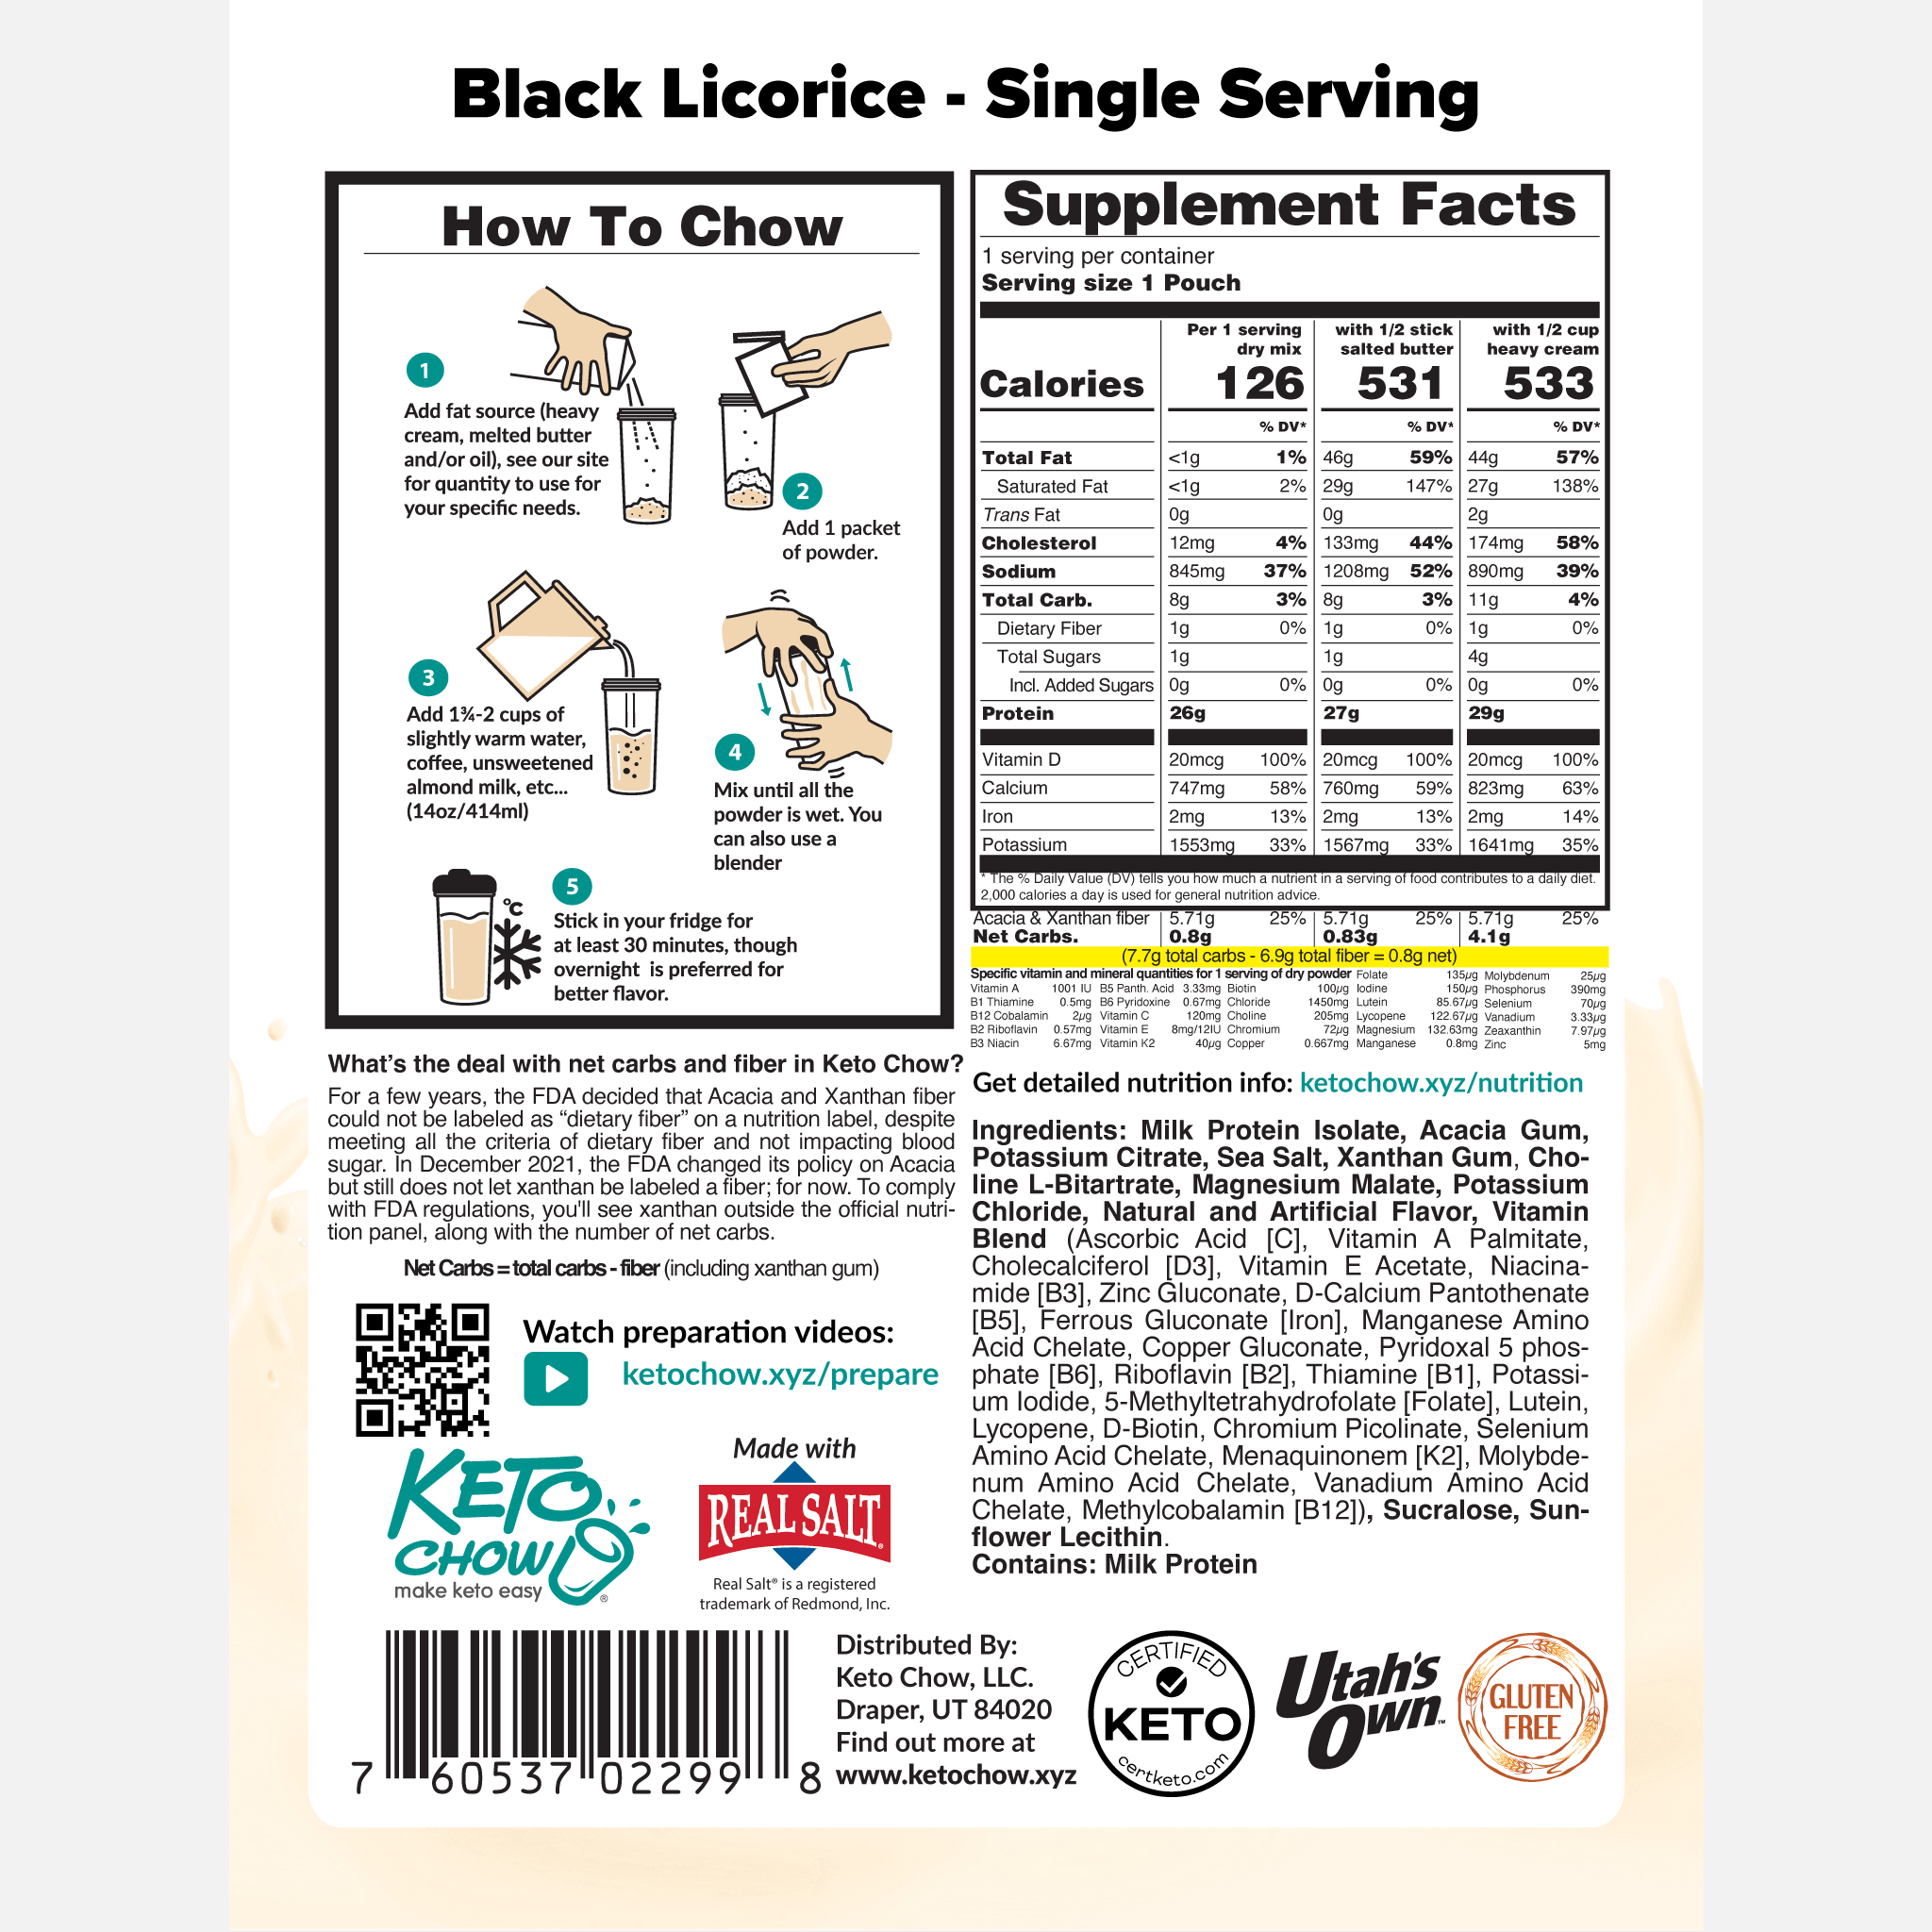 Black Licorice single serving back of package